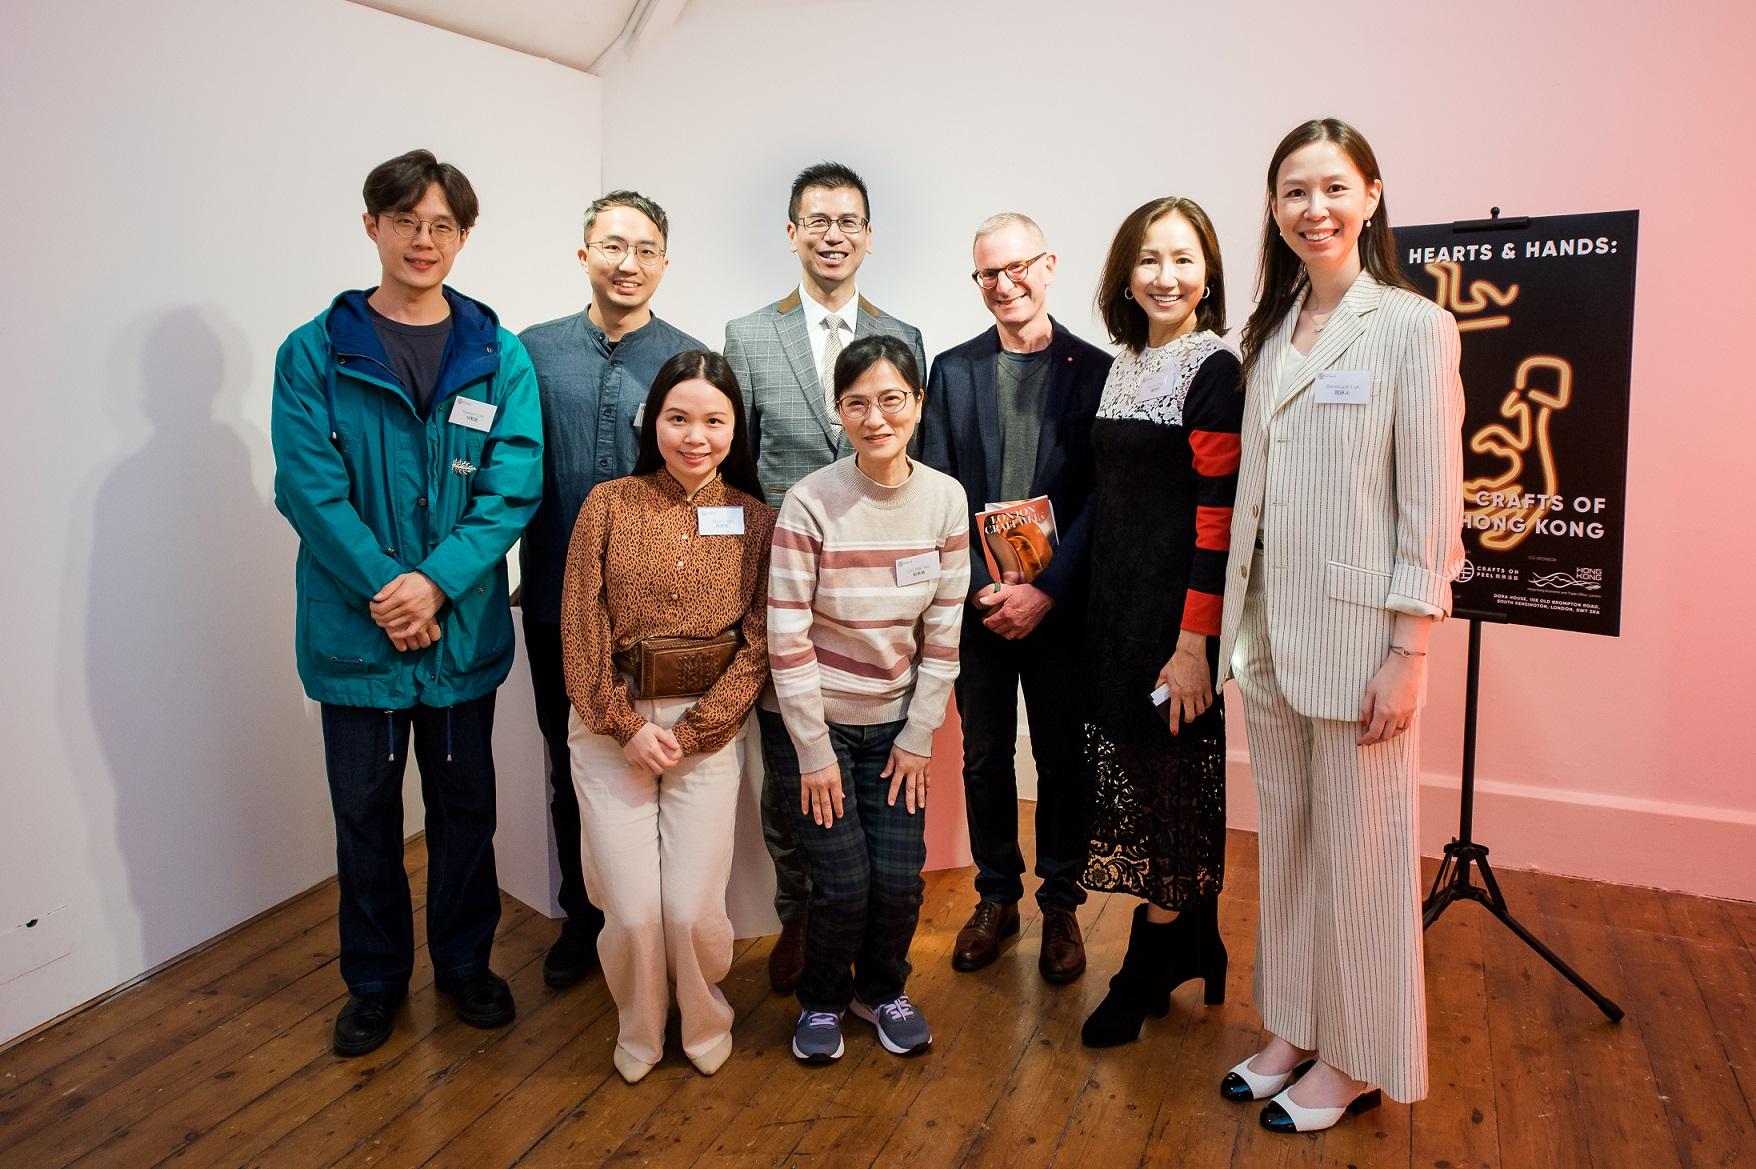 The Hong Kong Economic and Trade Office, London (London ETO), supported Crafts on Peel, a charitable organisation in Hong Kong, to join the London Craft Week 2023, bringing the "Hearts & Hands: Crafts of Hong Kong" exhibition to London. Photo shows the Director-General of London ETO, Mr Gilford Law (back row, third left); Crafts on Peel's founder, Ms Yama Chan (back row, second left); London Craft Week's Chairman and Founder, Mr Guy Salter (back row, third right); Crafts on Peel's Creative Director, Ms Penelope Luk (back row, first right); and participating artisans from Hong Kong at a reception of the exhibition on May 9 (London time).